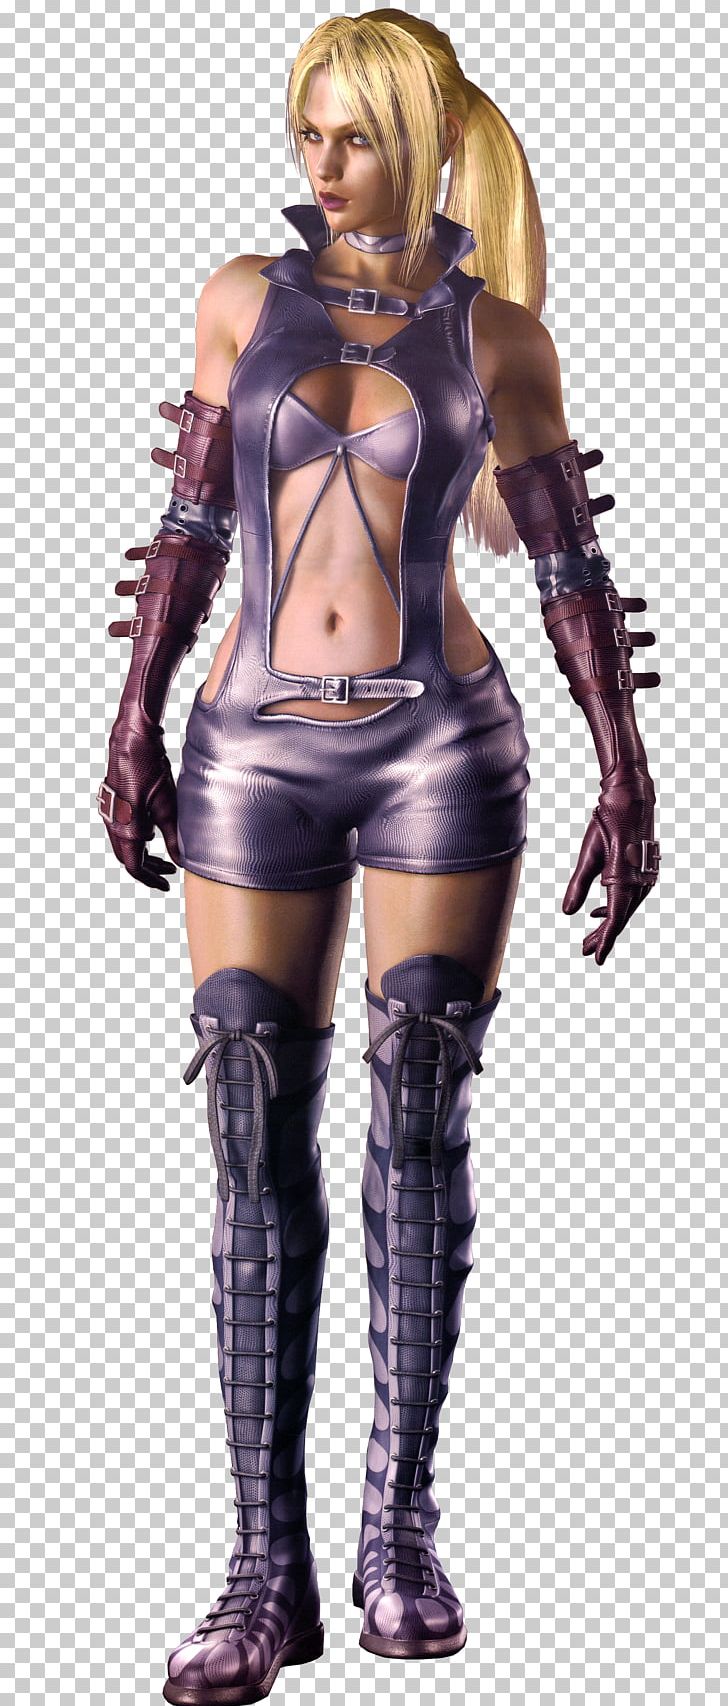 Death By Degrees Tekken Tag Tournament 2 Nina Williams Tekken 5: Dark Resurrection Tekken 6 PNG, Clipart, Armour, Cost, Death By Degrees, Fictional Character, Gaming Free PNG Download